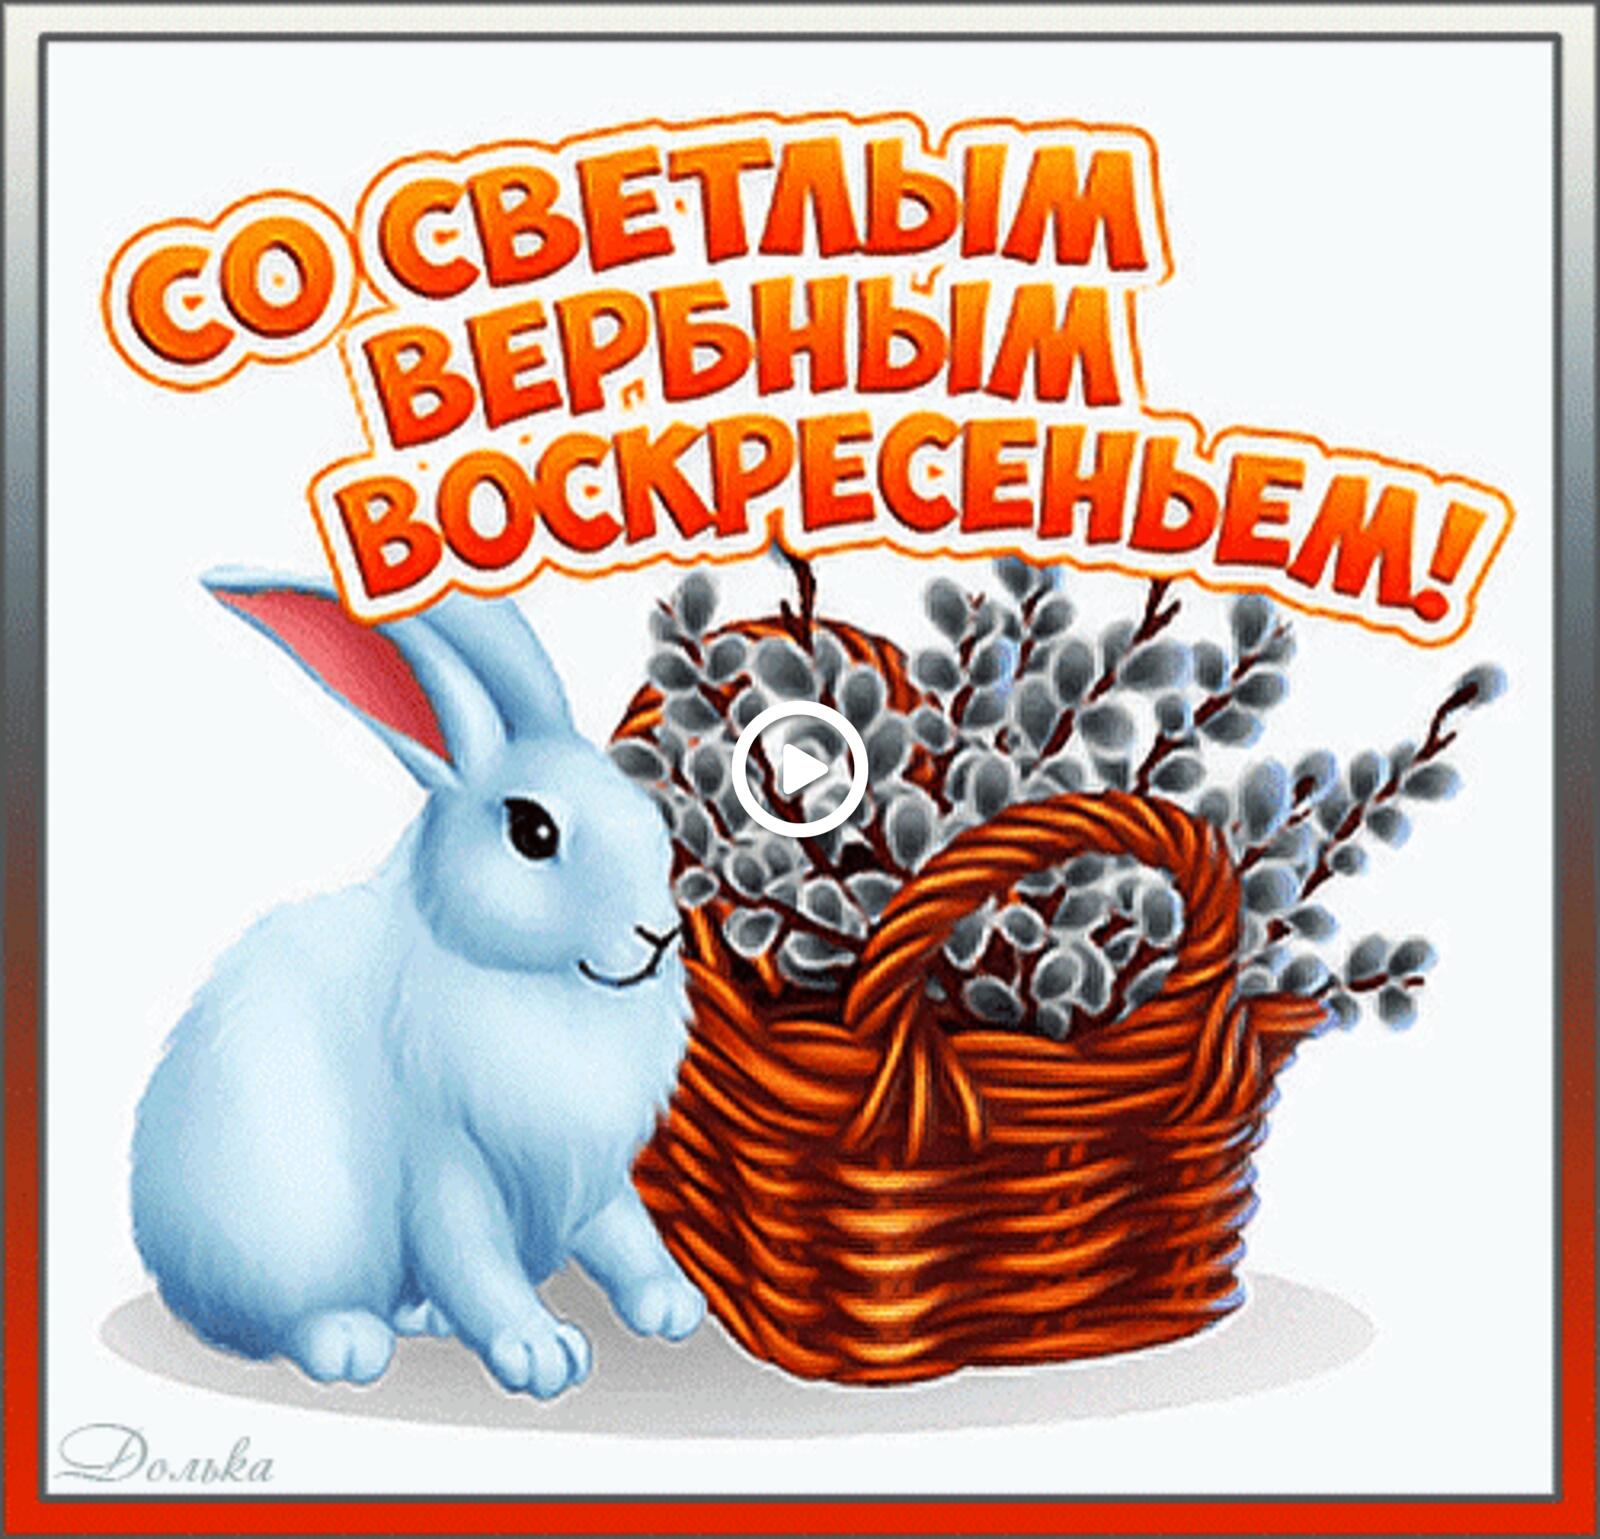 A postcard on the subject of happy palm sunday holidays a rabbit for free